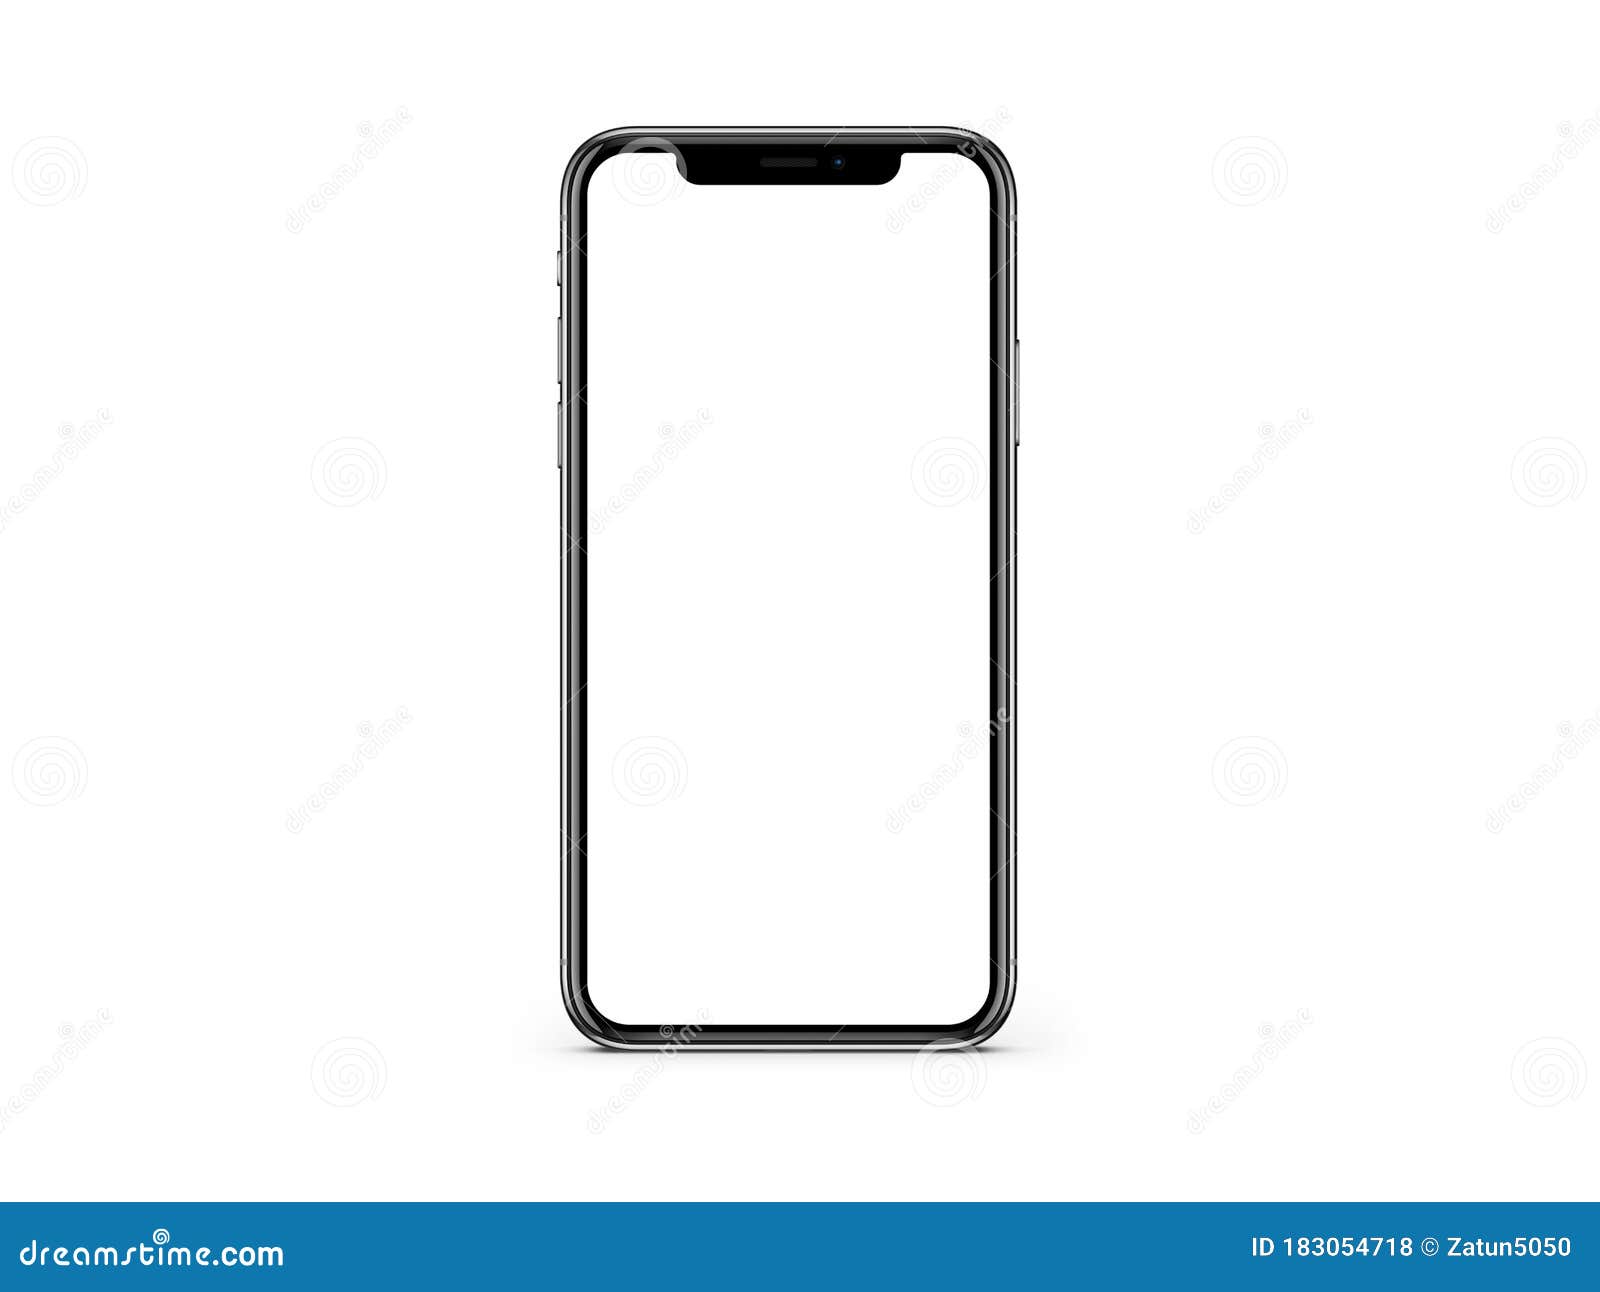 IPhone X Blank White Screen Mockup on White Color Background Mockup Stock  Illustration - Illustration of metal, business: 183054718